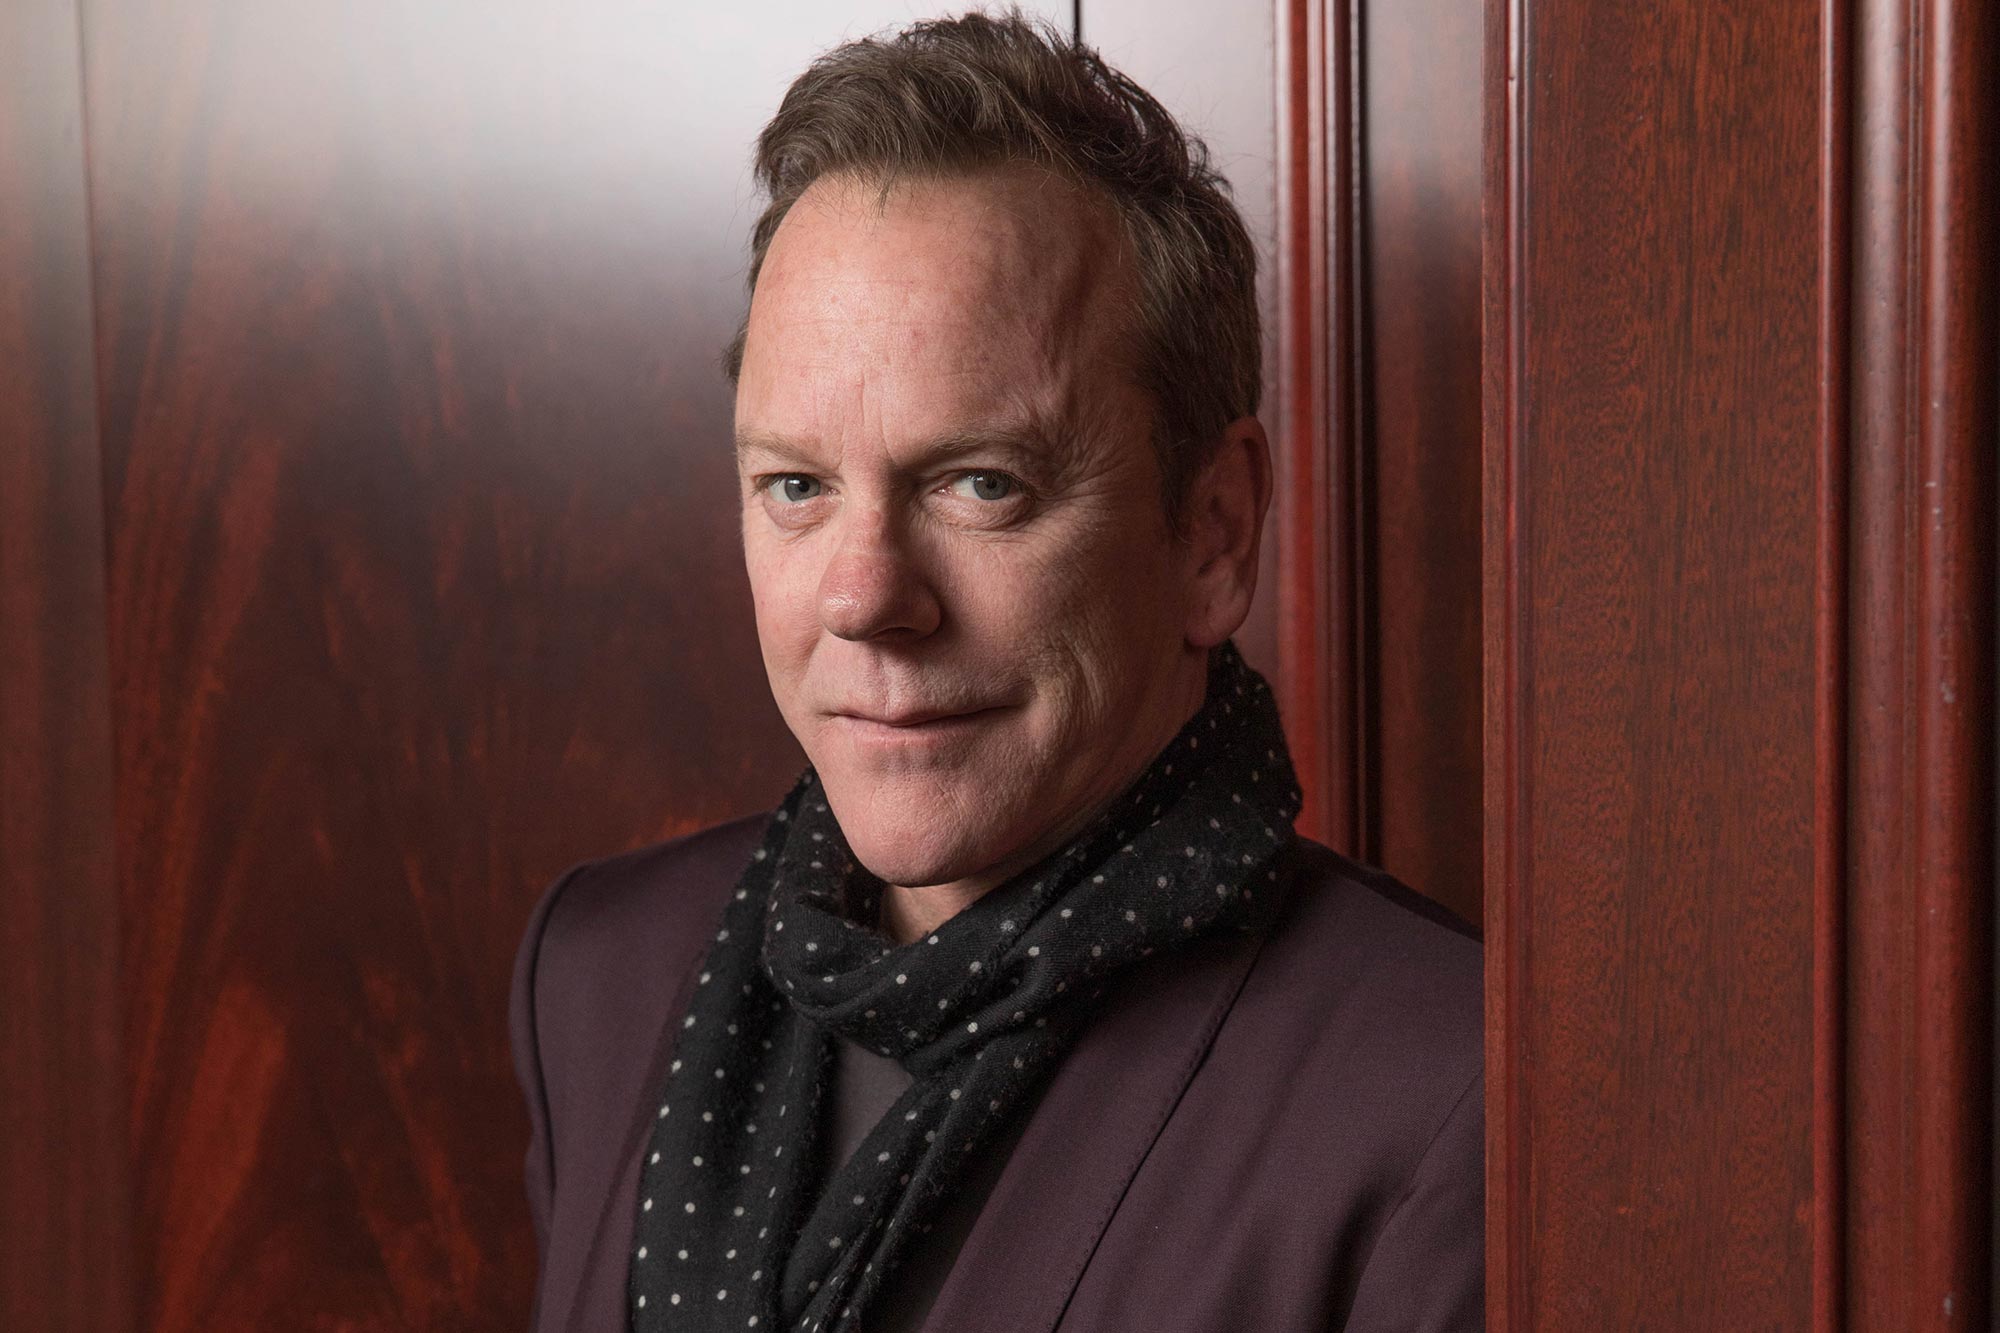 Kiefer Sutherland wearing a dark glossy suit and black scarf while smiling